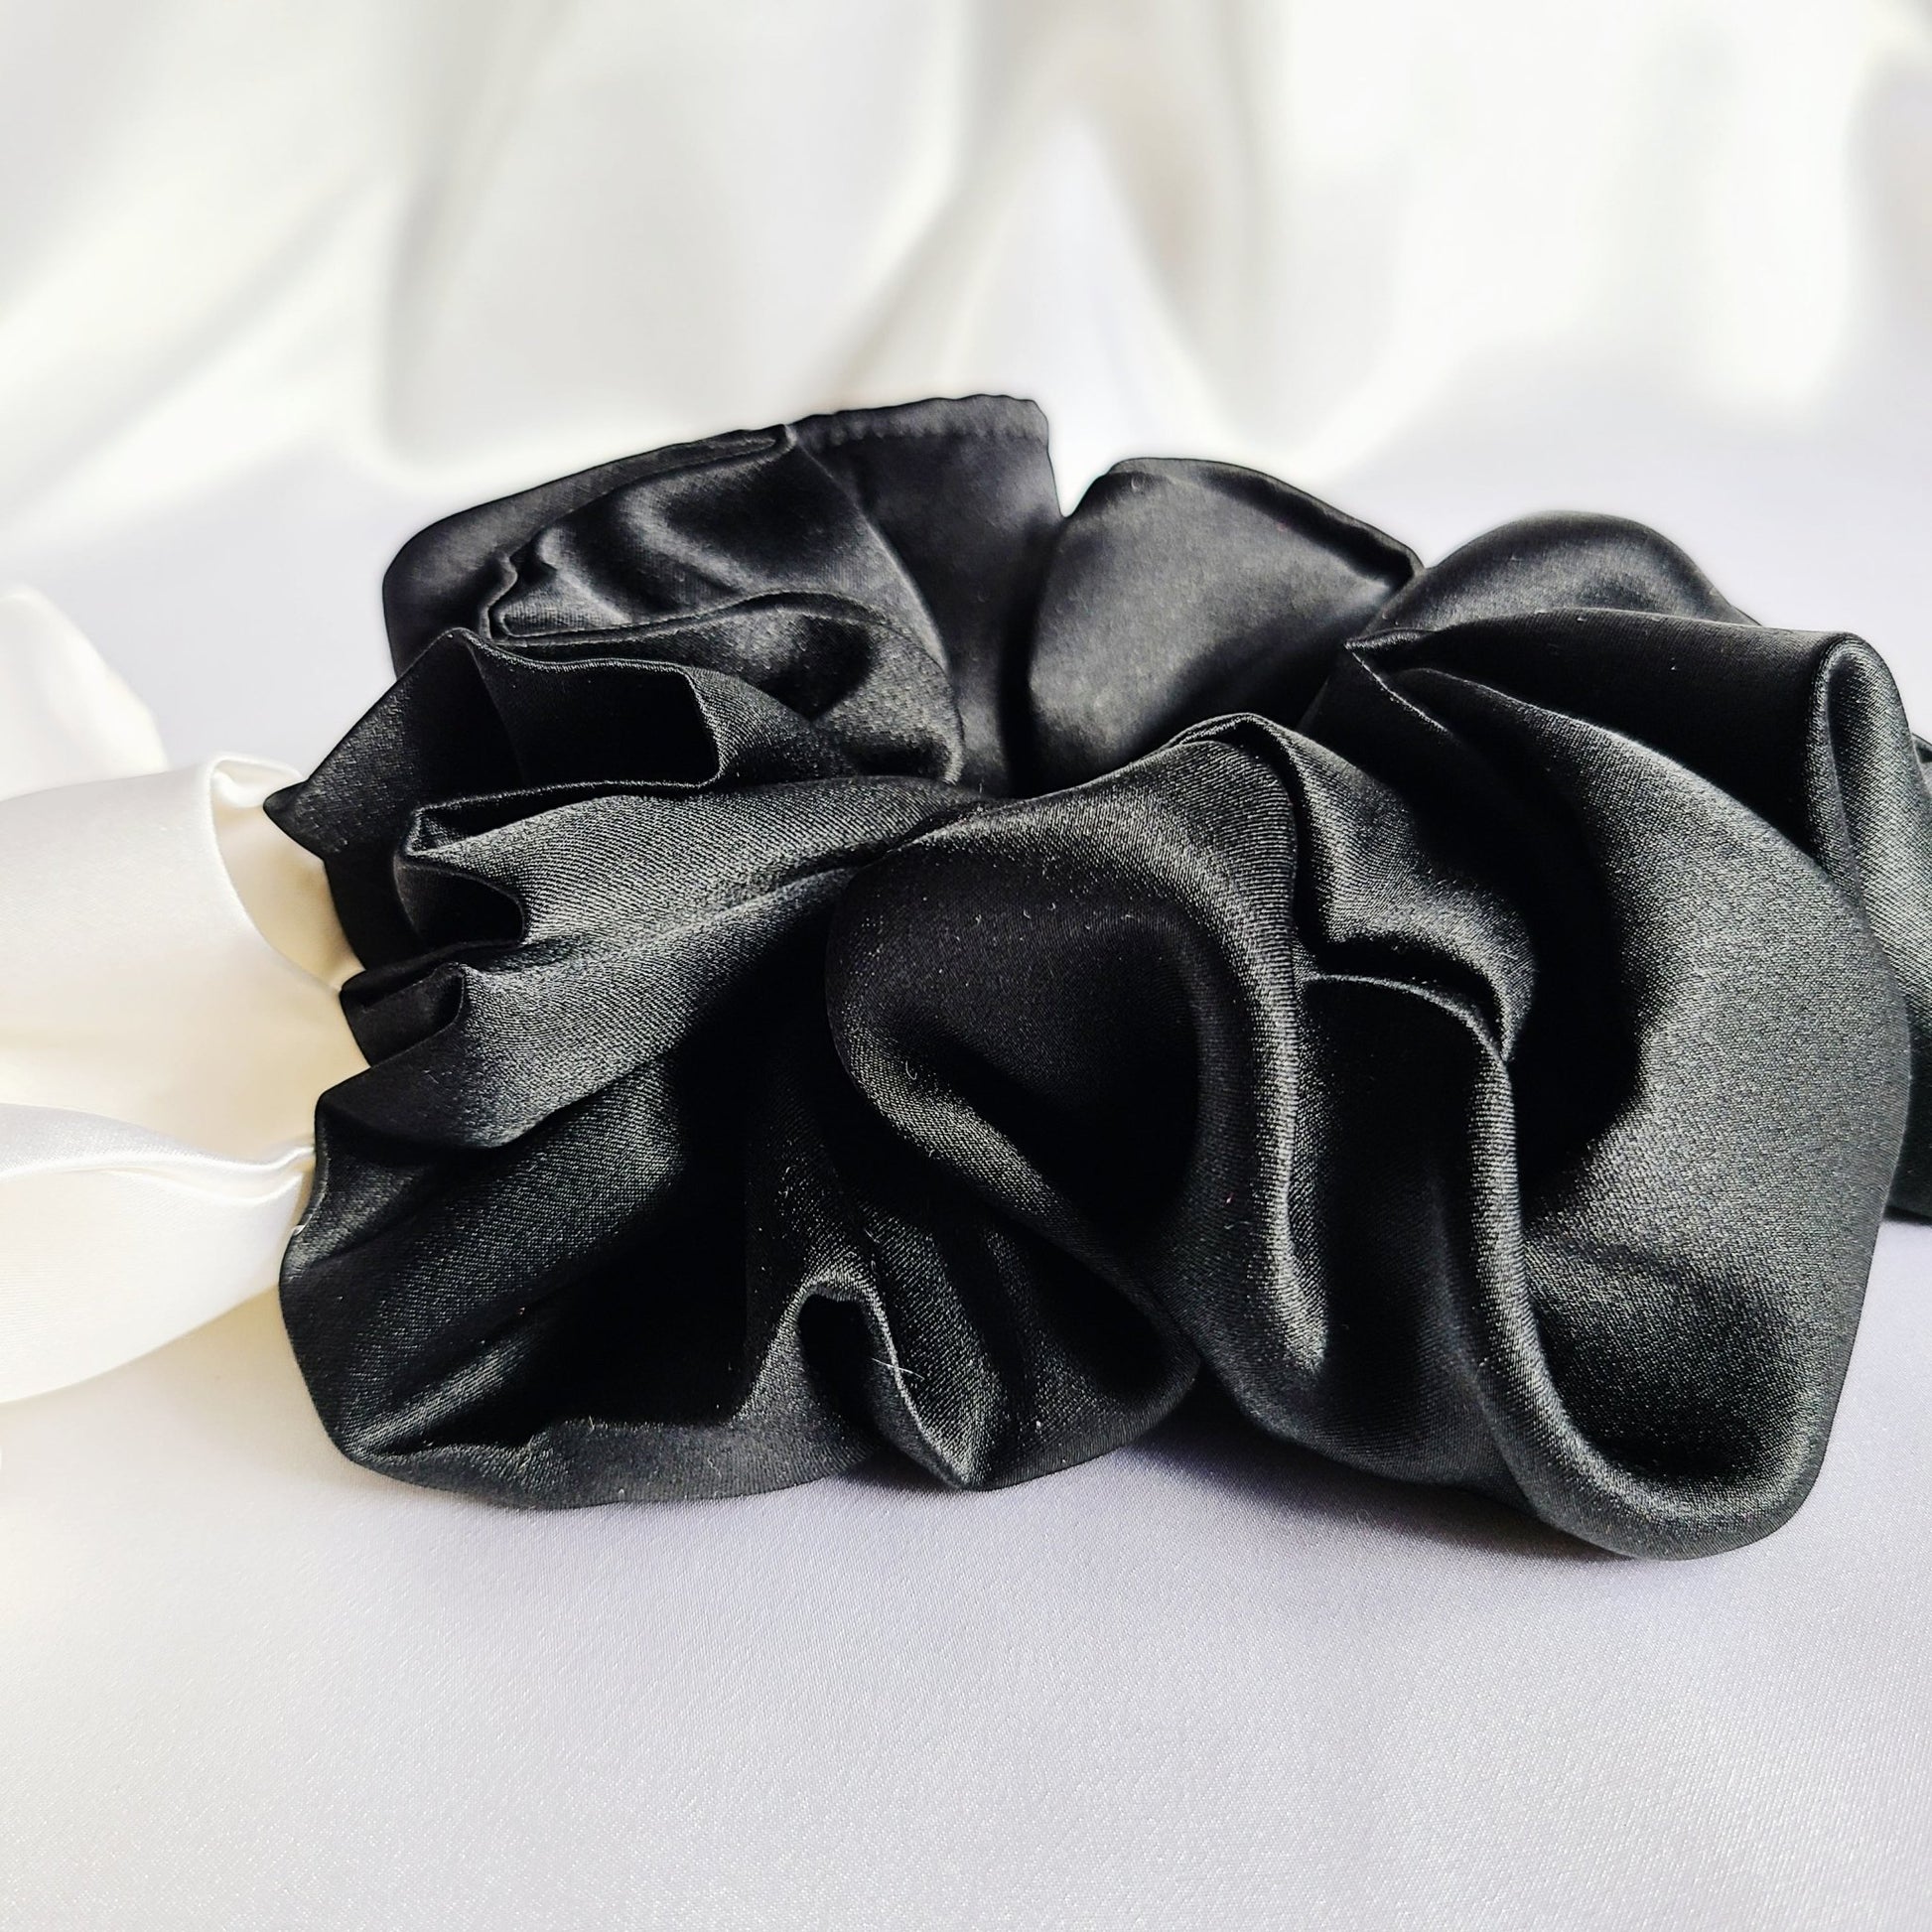 Extra Large Silk Scrunchies - Set of Black and White - RBelliard